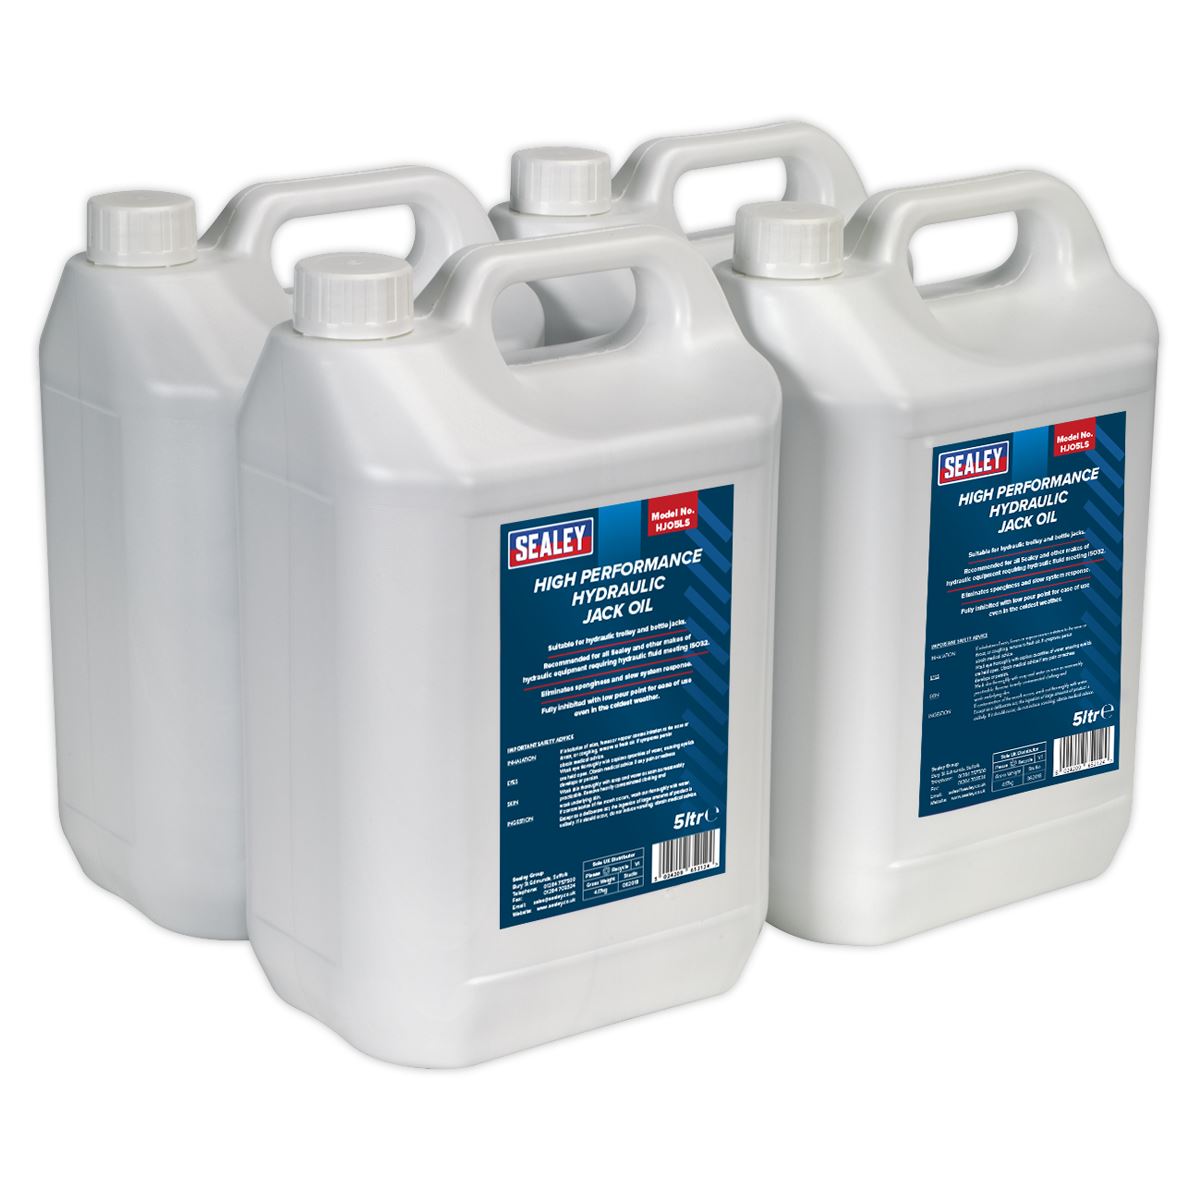 Sealey Hydraulic Jack Oil 5L - Pack of 4